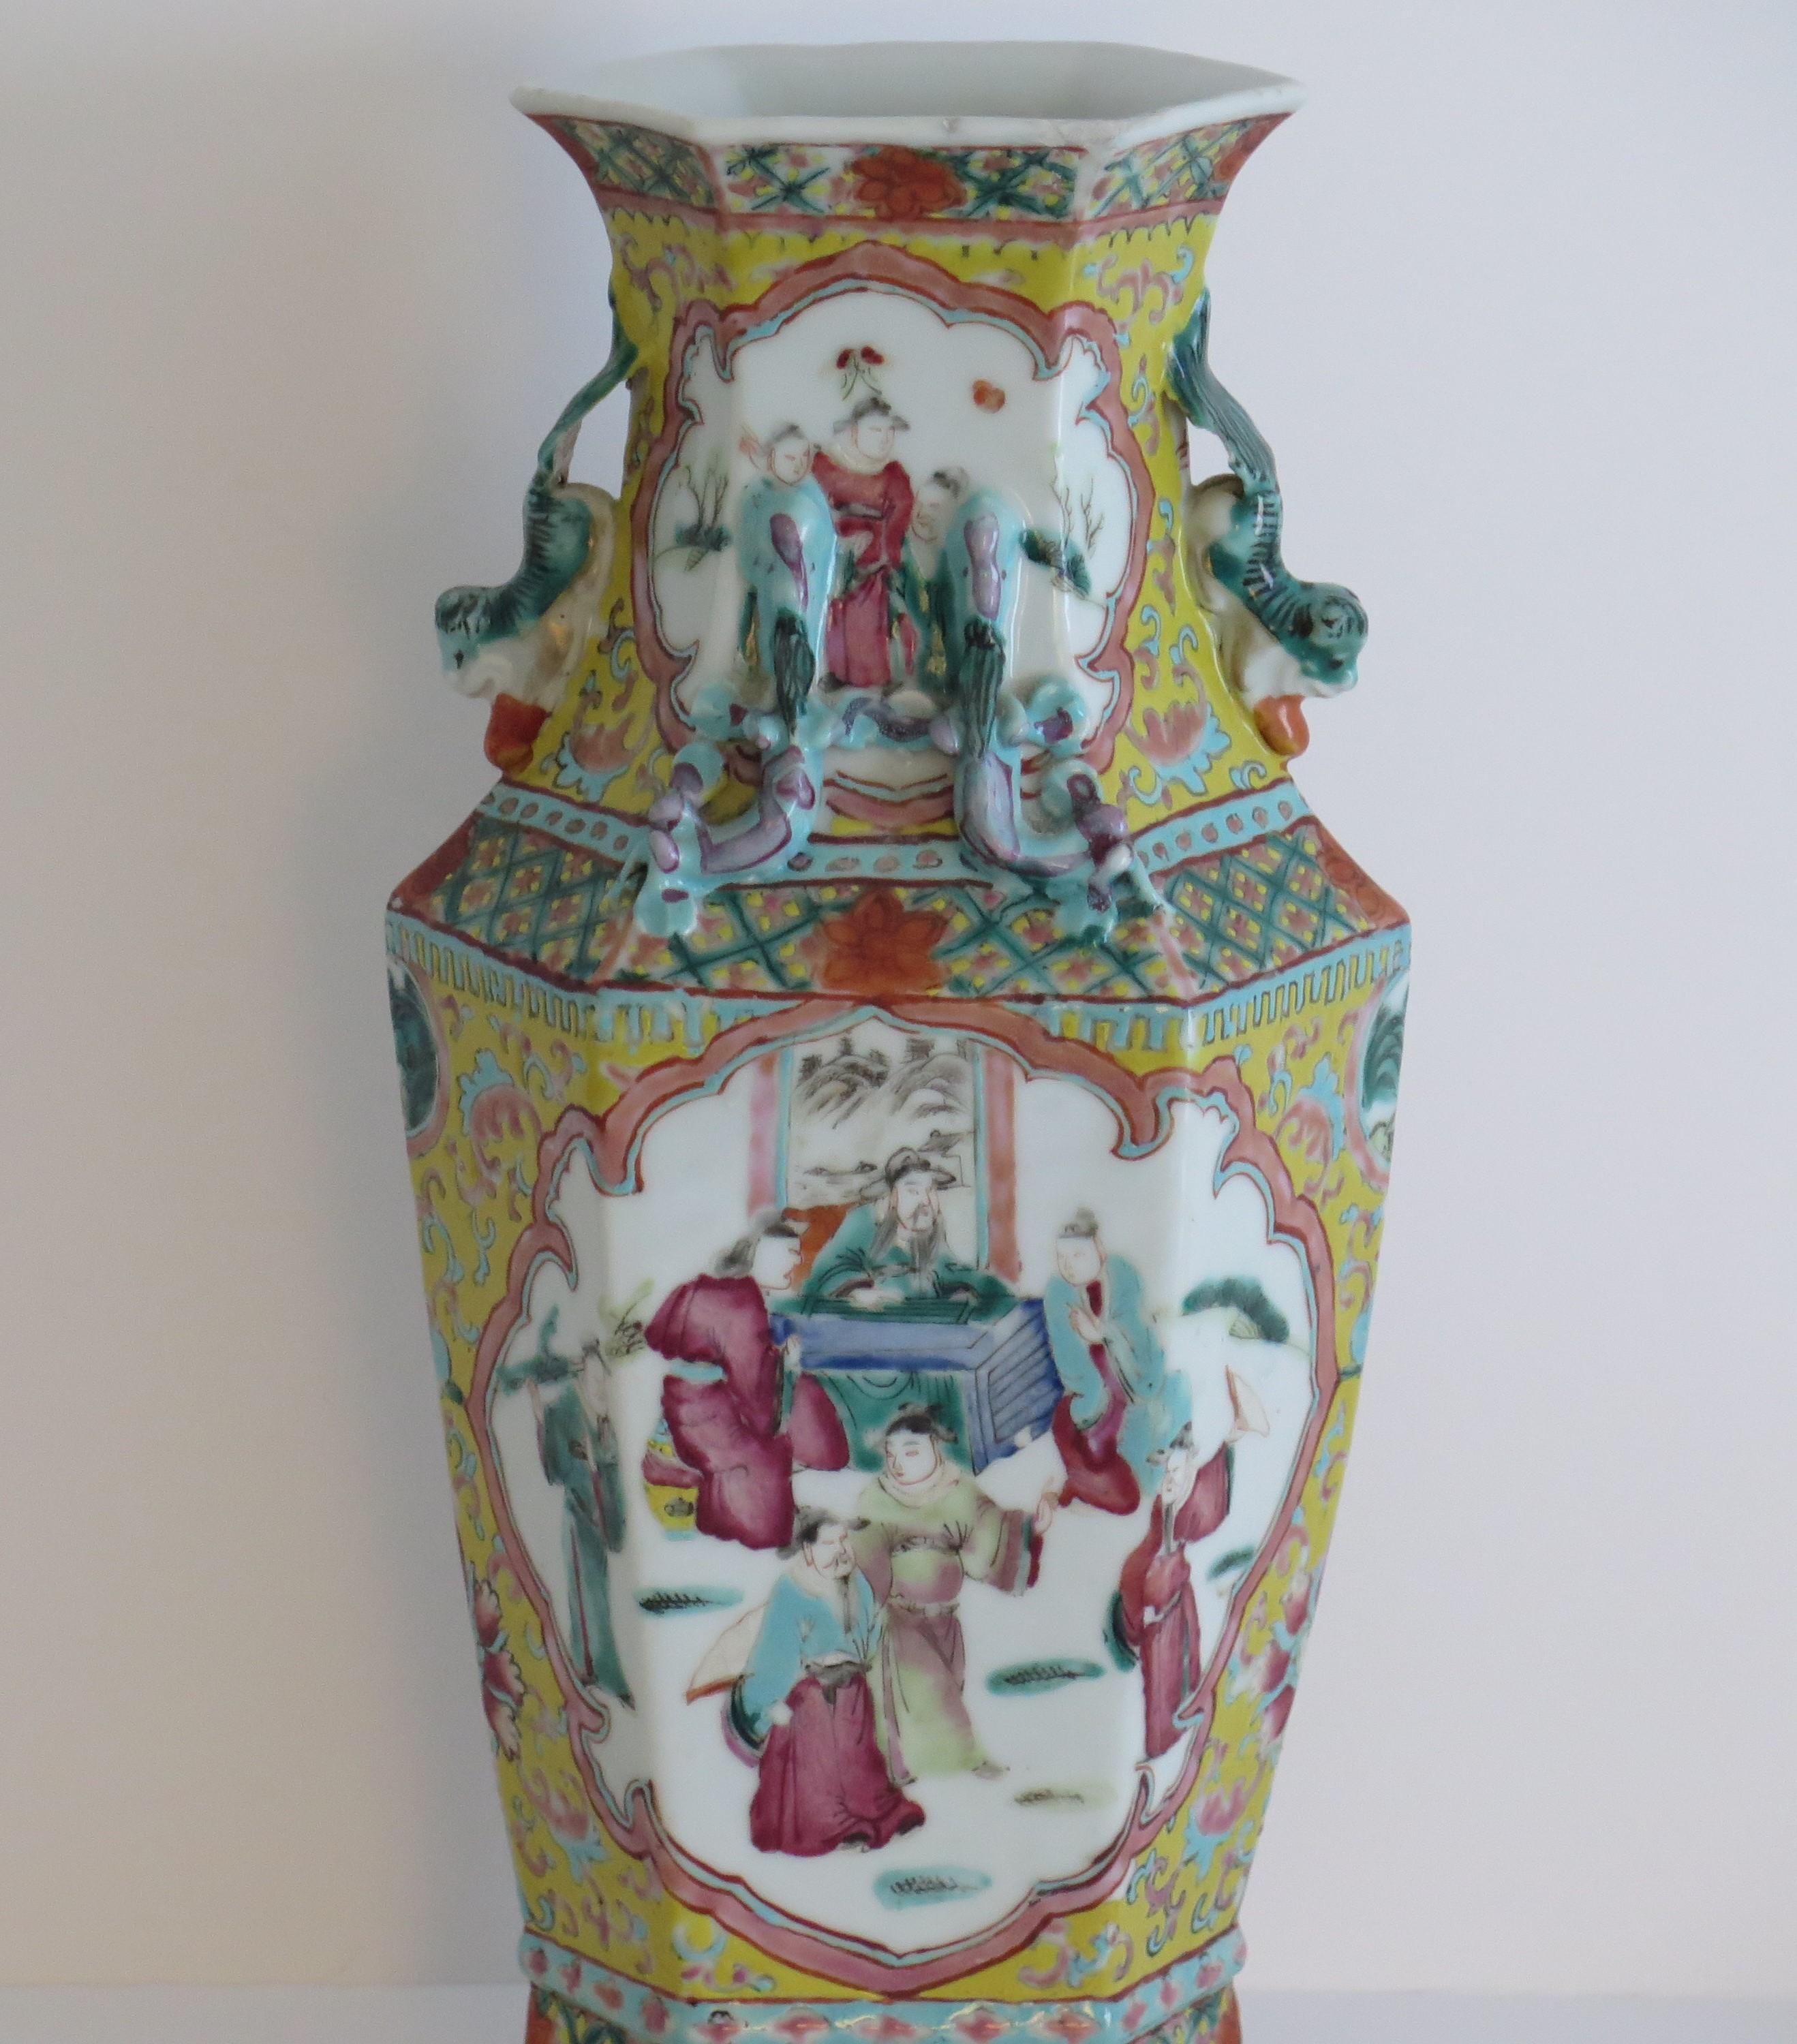 20th Century Chinese Export Vase Famille Rose Porcelain, Late Qing or Early Republic Period